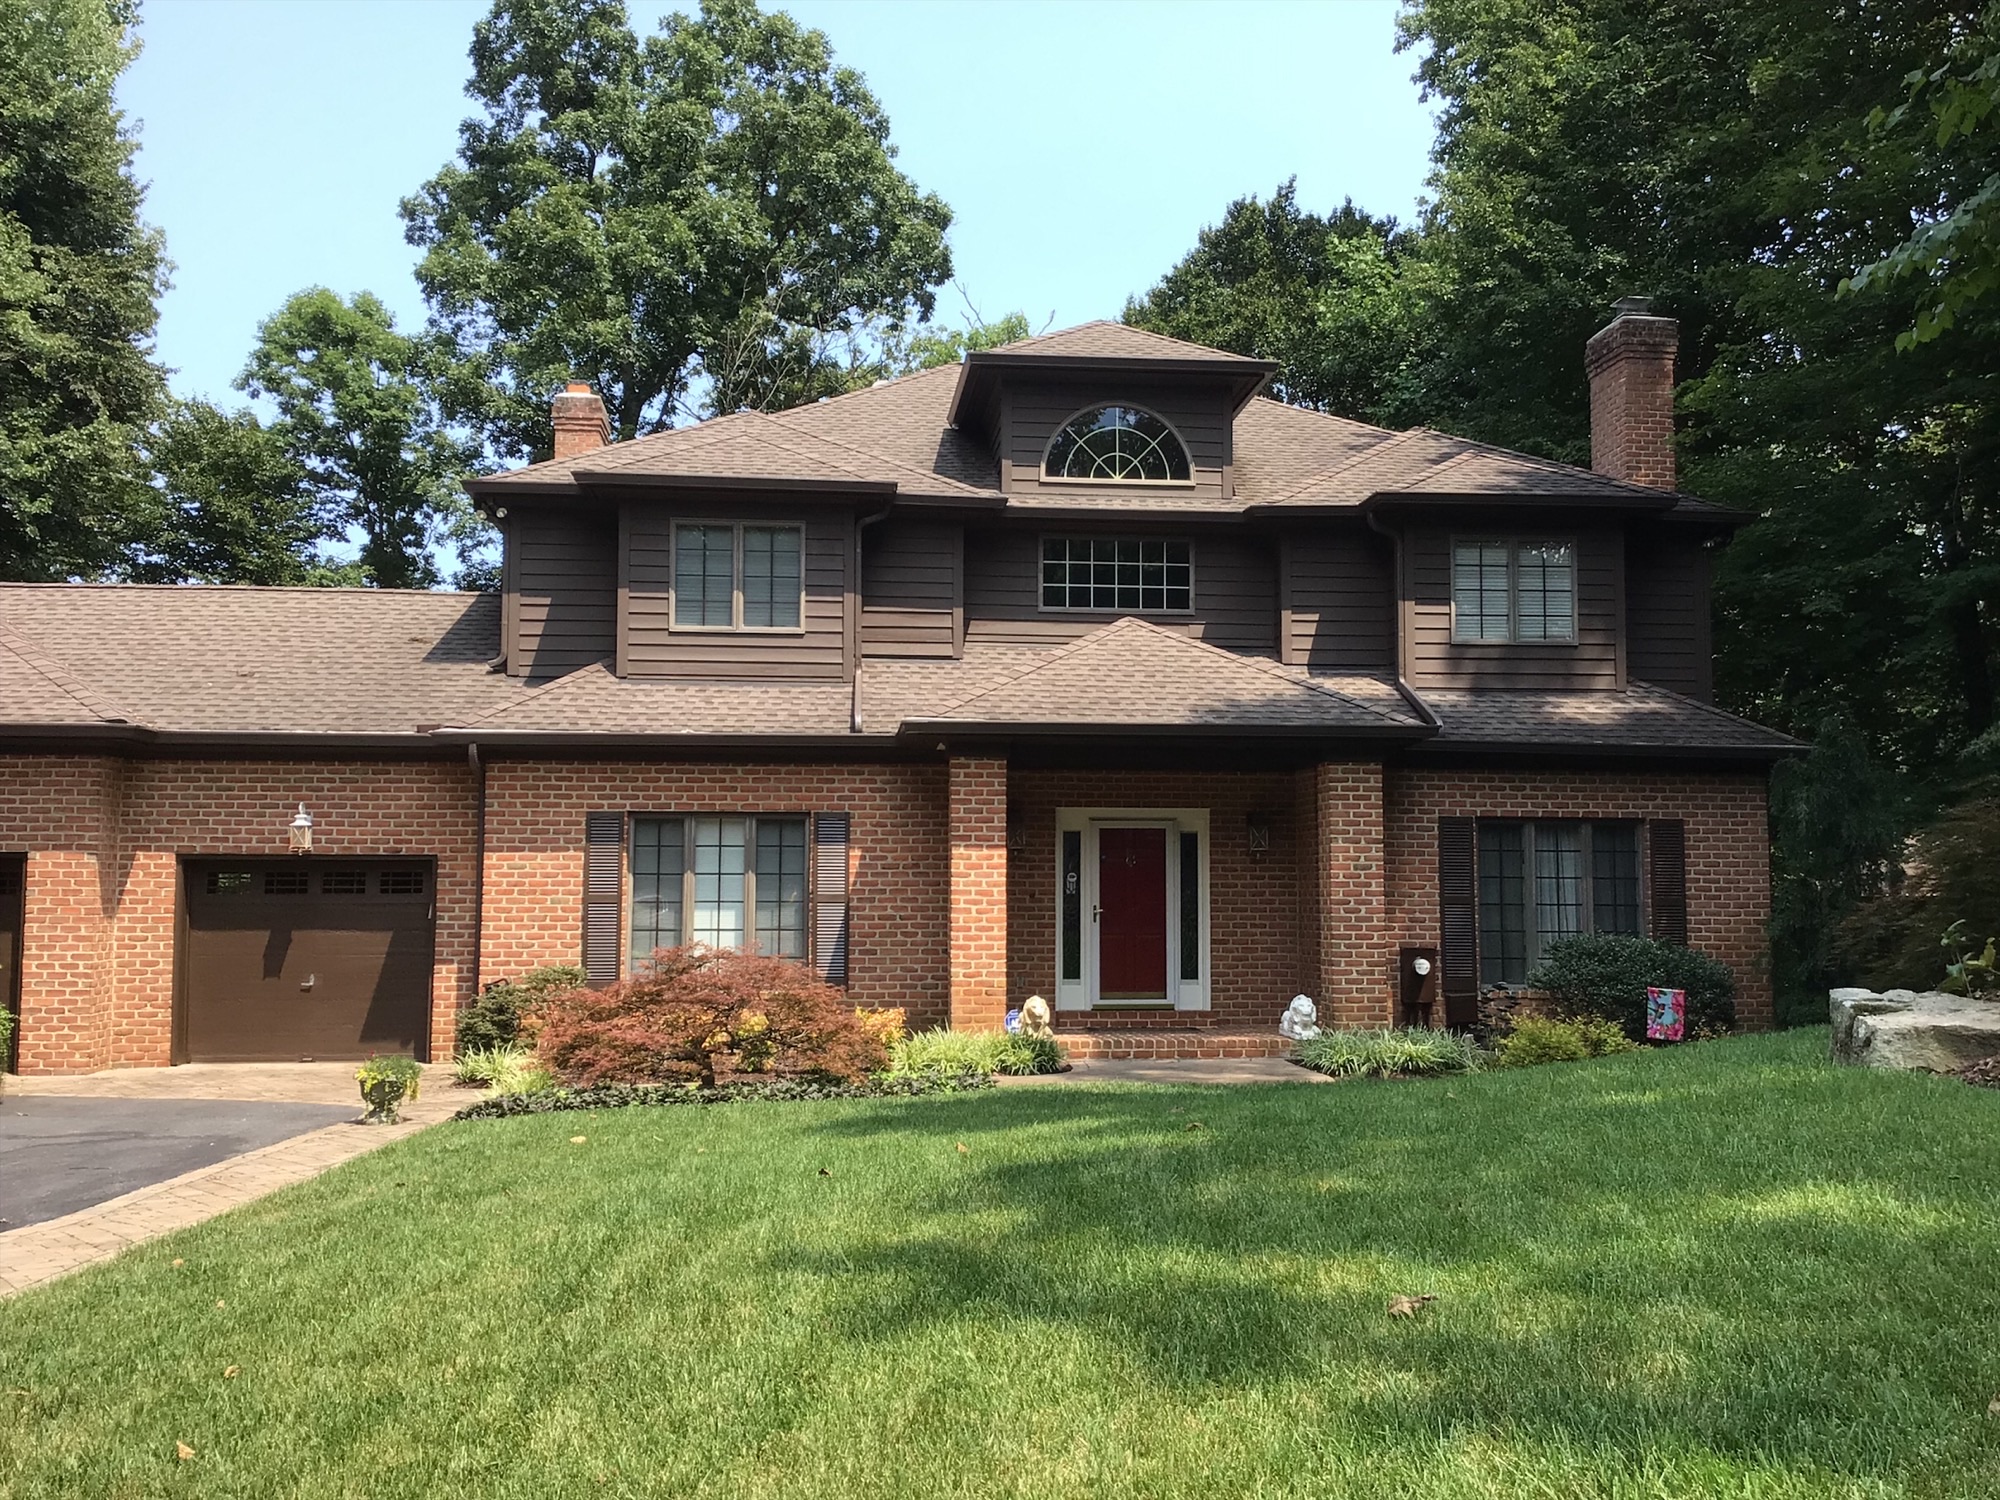 Residential Exterior Painting in Crownsville, MD After